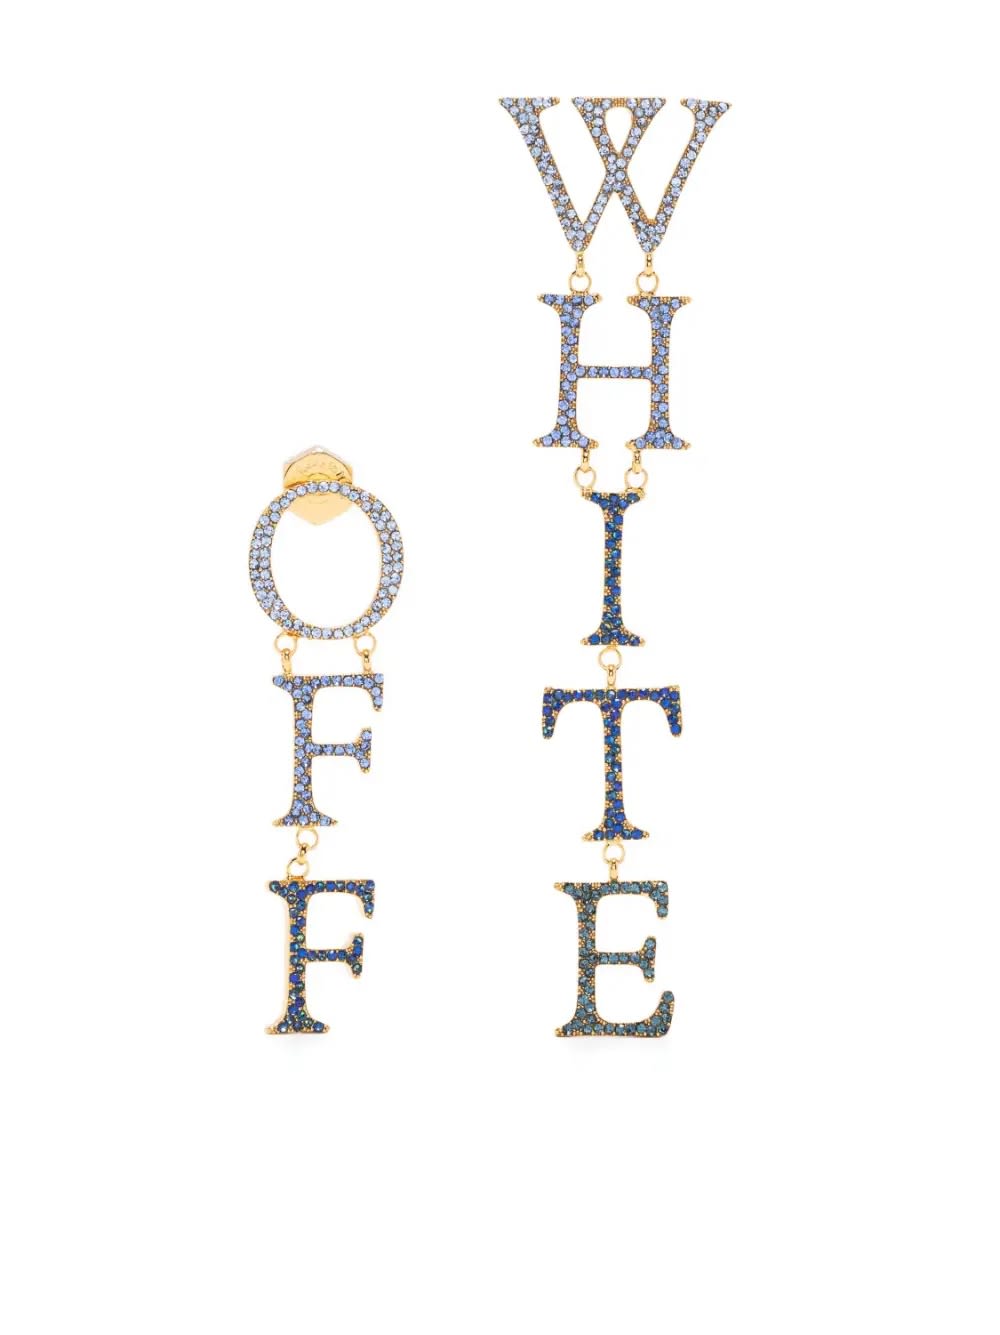 OFF-WHITE PAVÈ PENDANT EARRINGS WITH BLUE LOGO